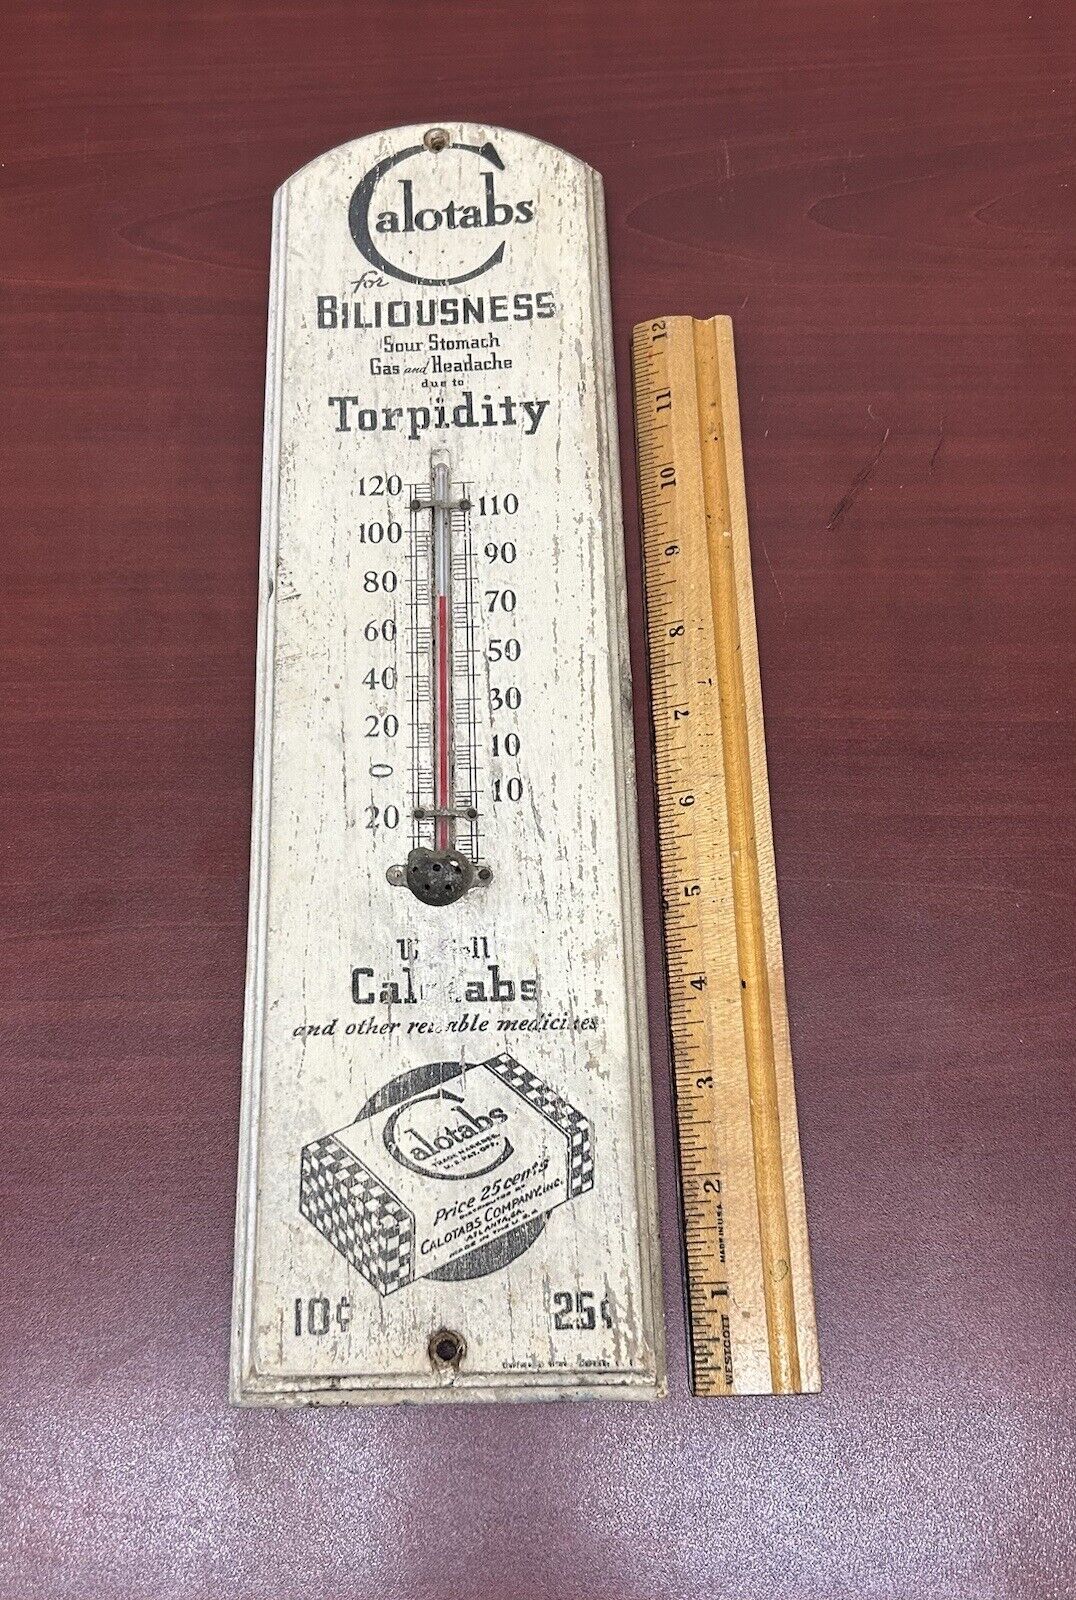 Vintage 1940's CALOTABS DRUGSTORE PHARMACY ADVERTISING WOODEN THERMOMETER SIGN